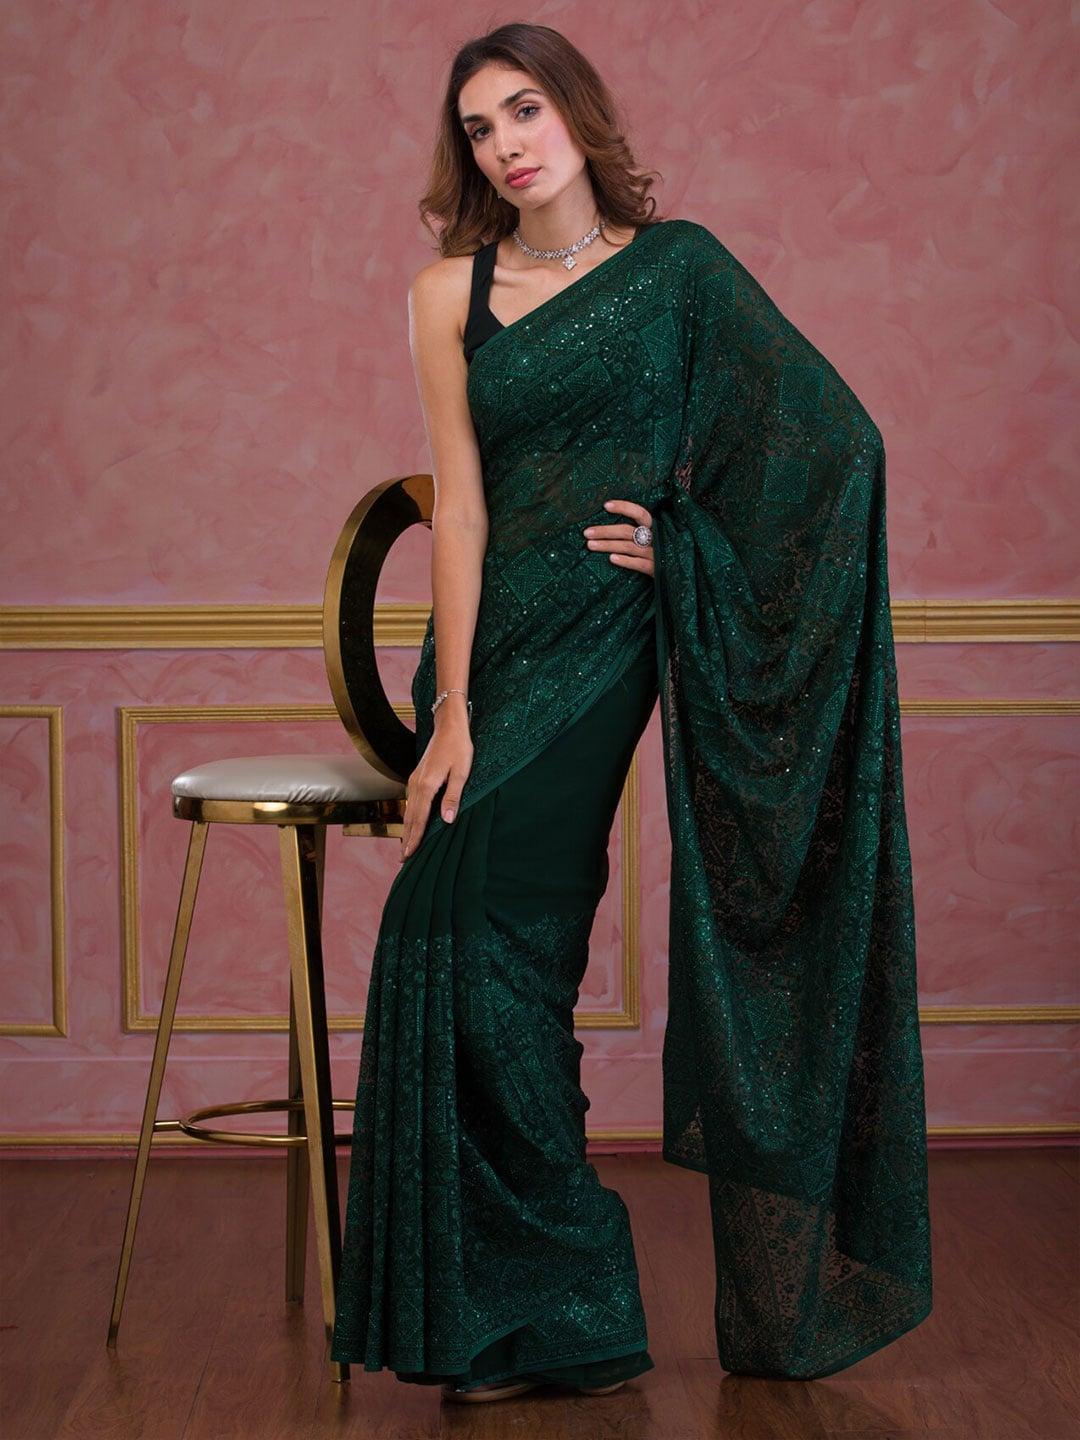 Koskii Green Embellished Embroidered Poly Georgette Saree